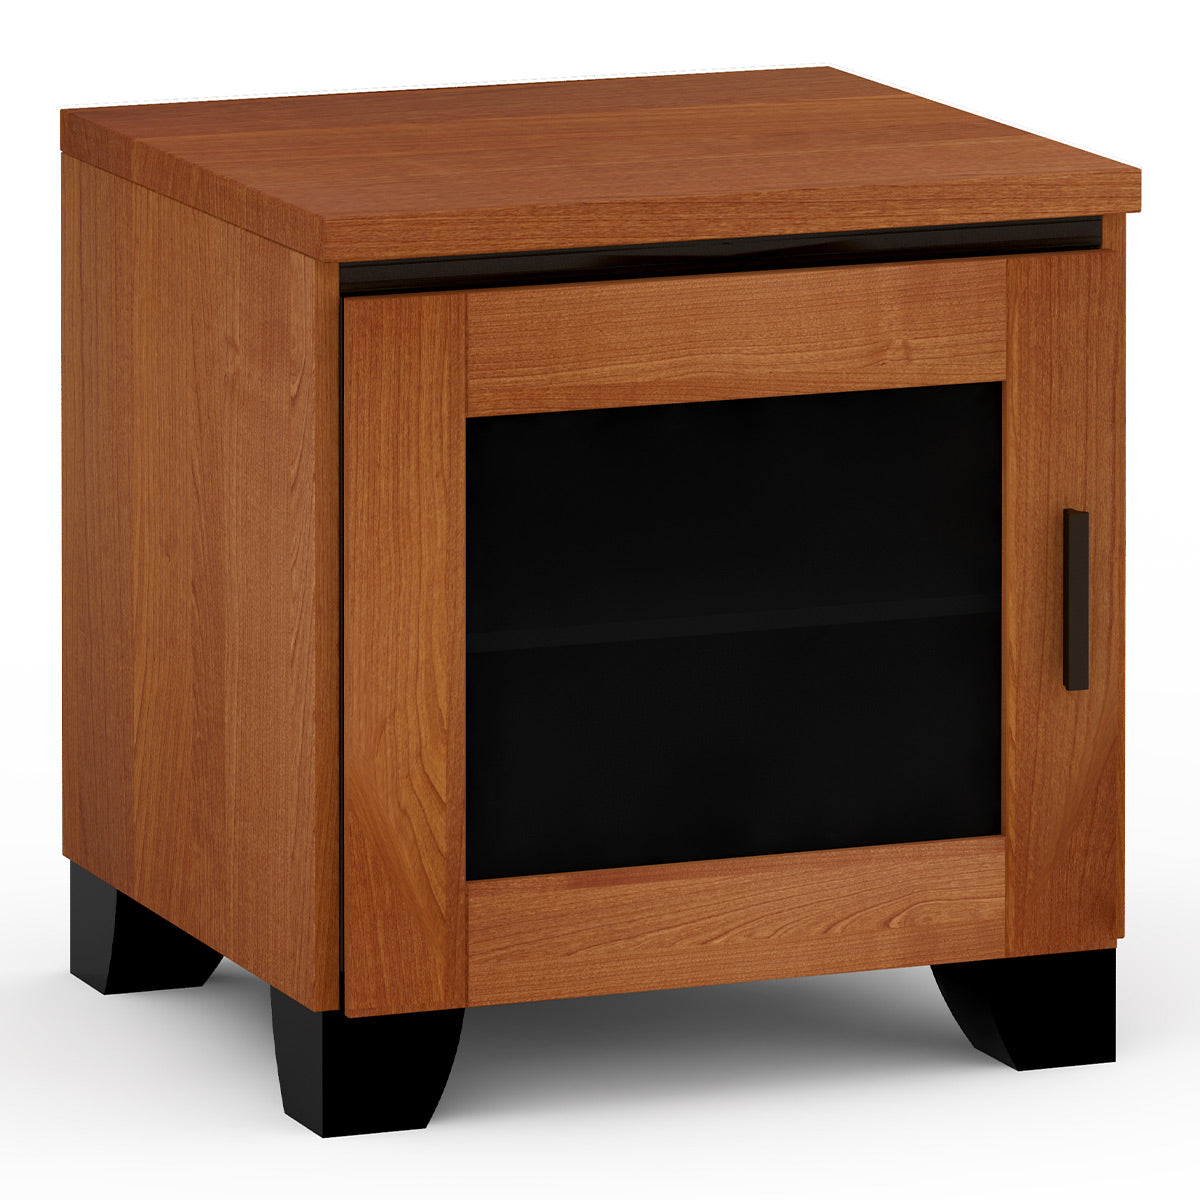 Salamander Chameleon Collection Elba 217 AV Cabinet (Wide Framed American Cherry Doors with Smoked Glass Inserts)